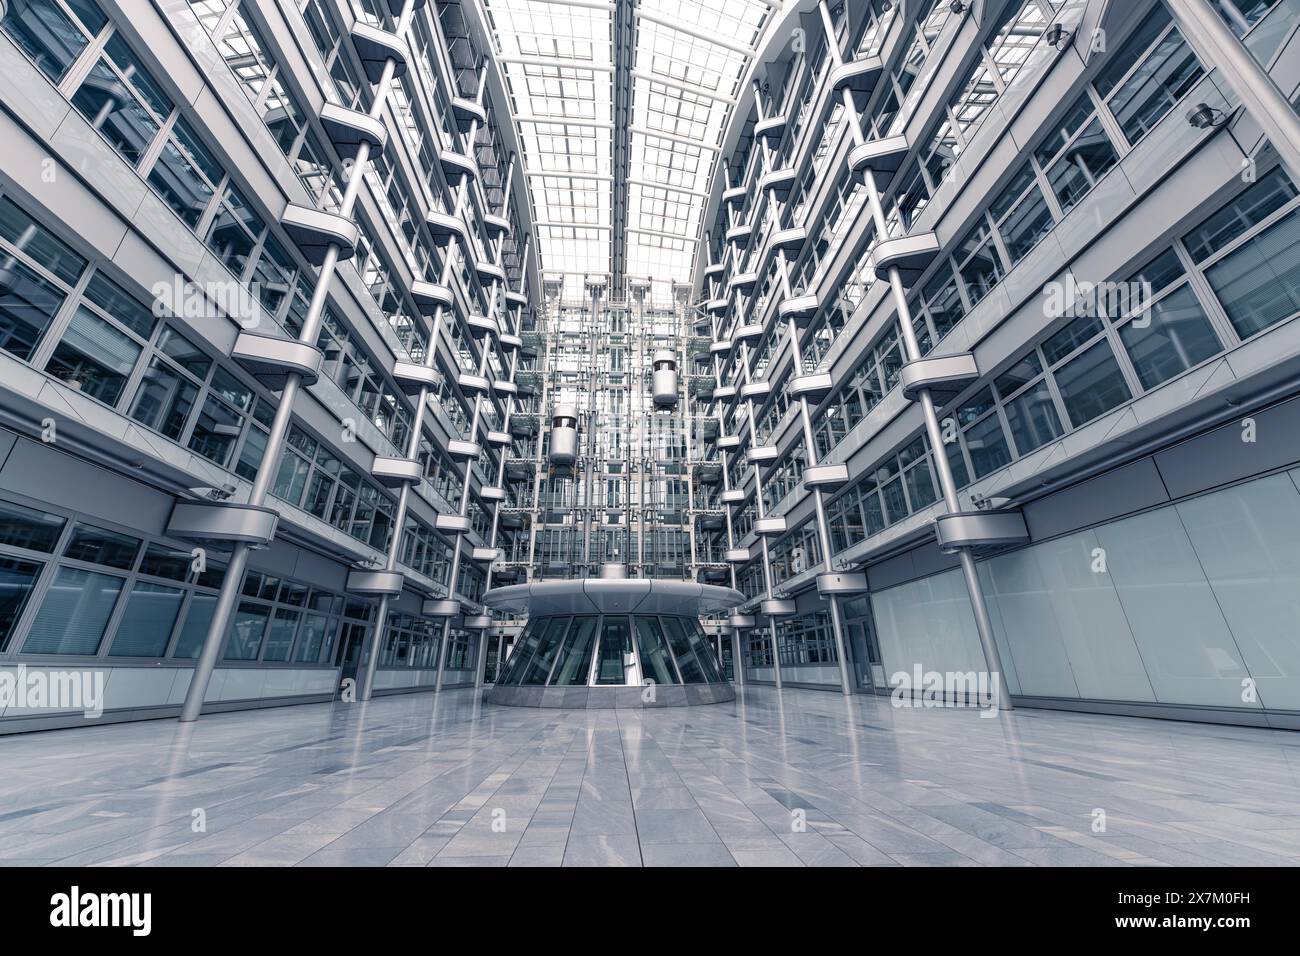 Wide-angle shot of a modern office building with glass facades and symmetrical structure, Berlin, IHK, Germany Stock Photo